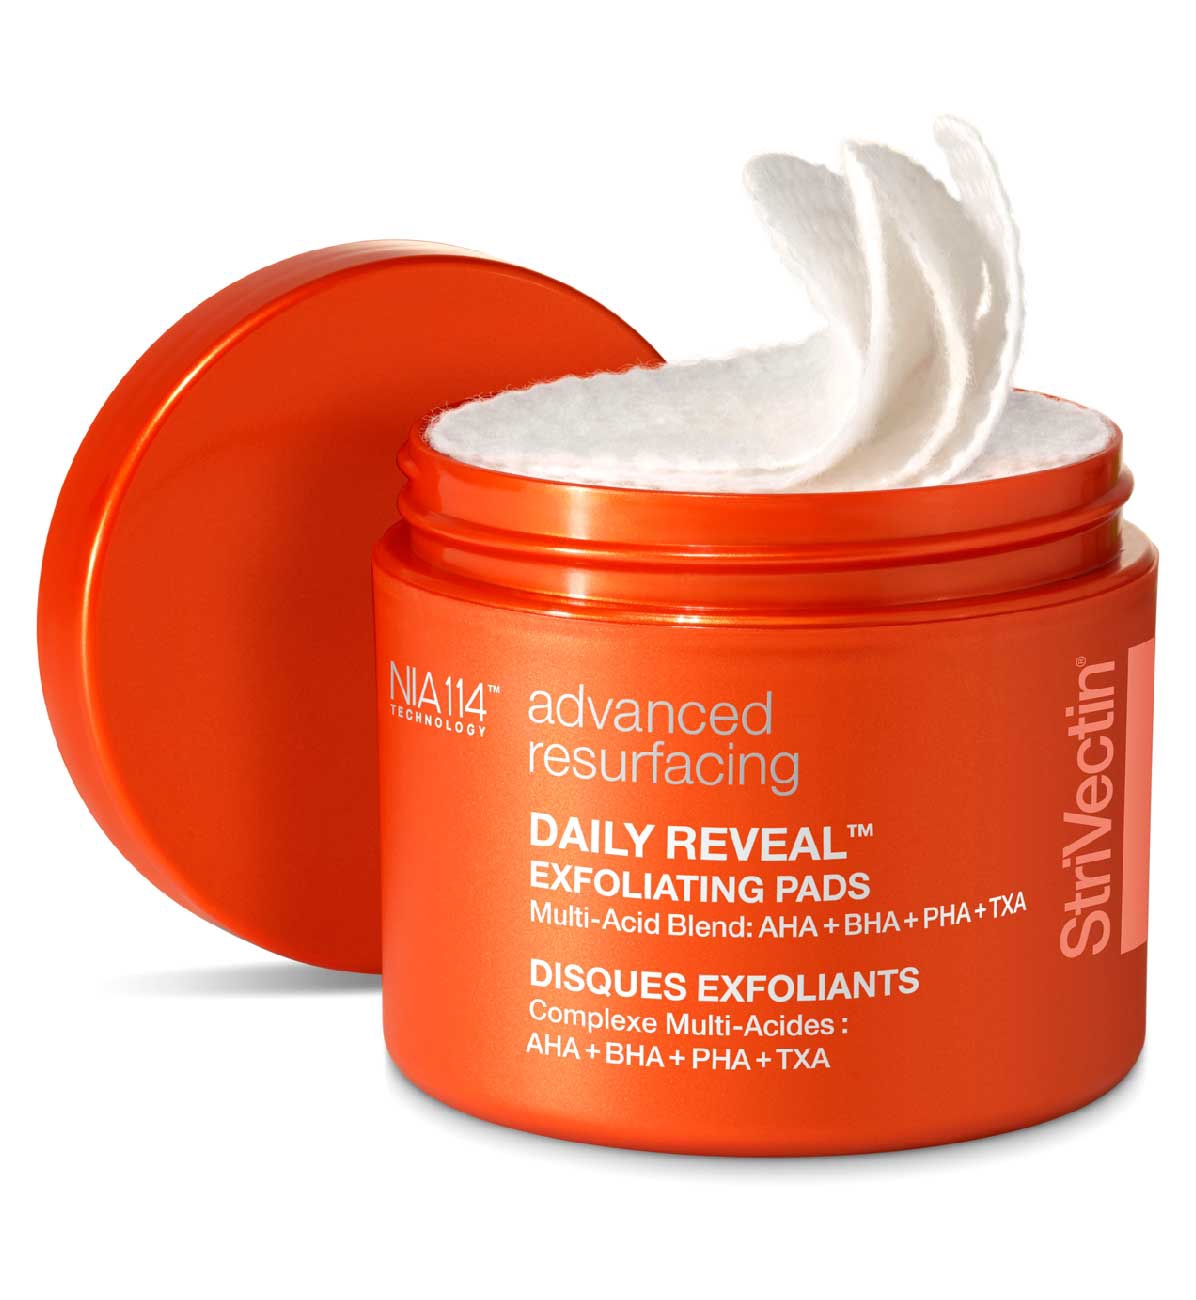 StriVectin Advance Resurfacing Daily Reveal Exfoliating Pads, £39